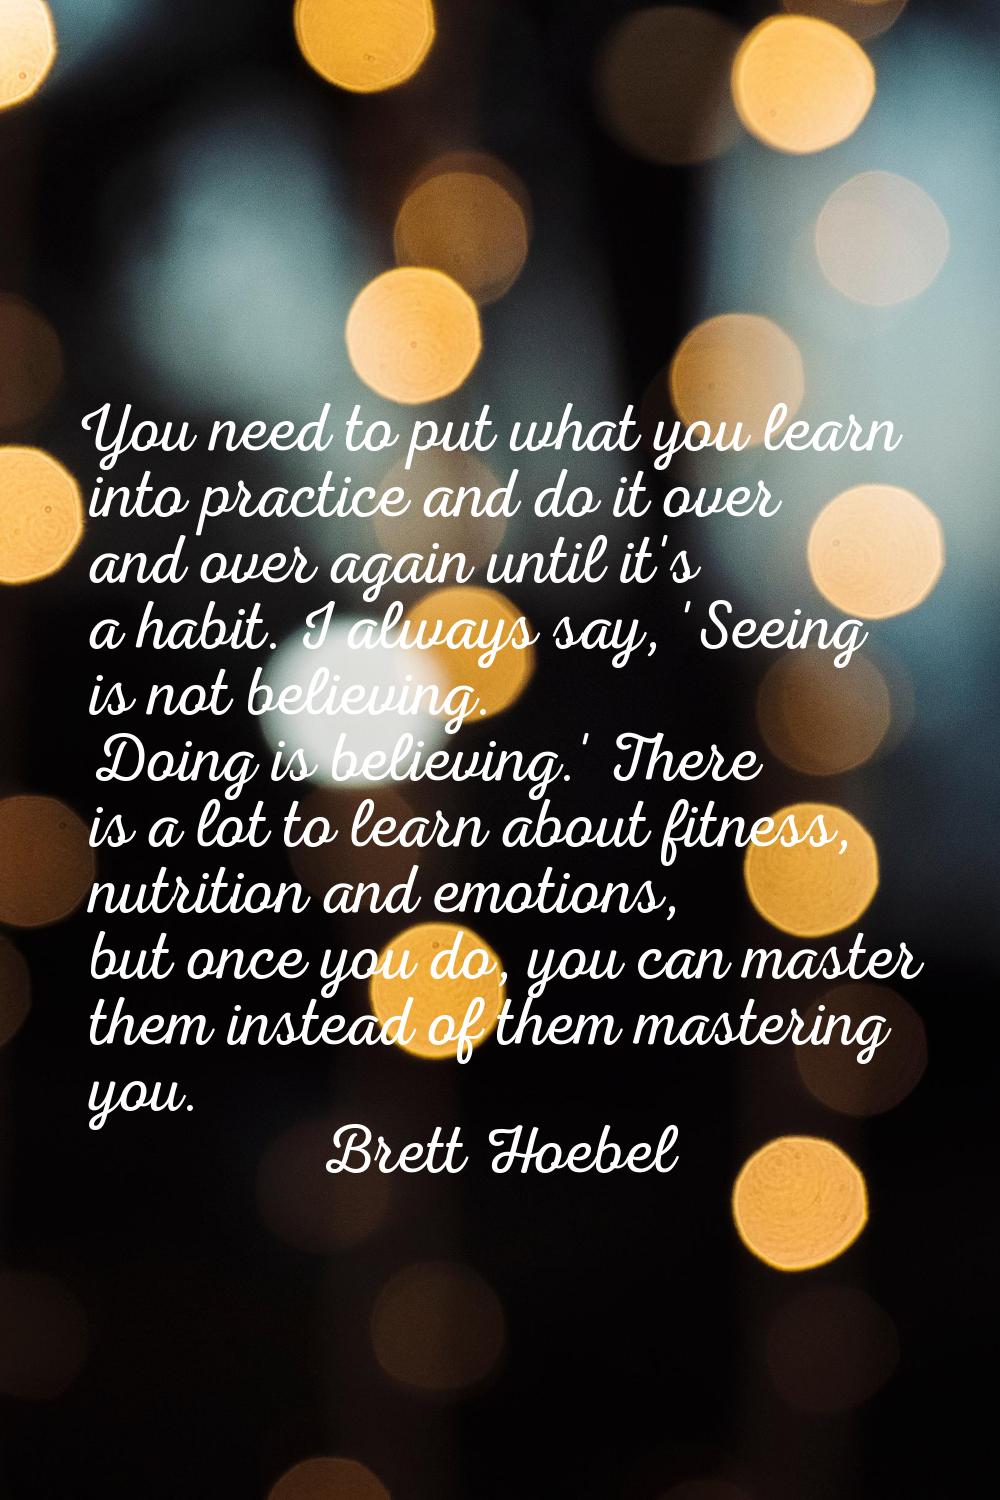 You need to put what you learn into practice and do it over and over again until it's a habit. I al